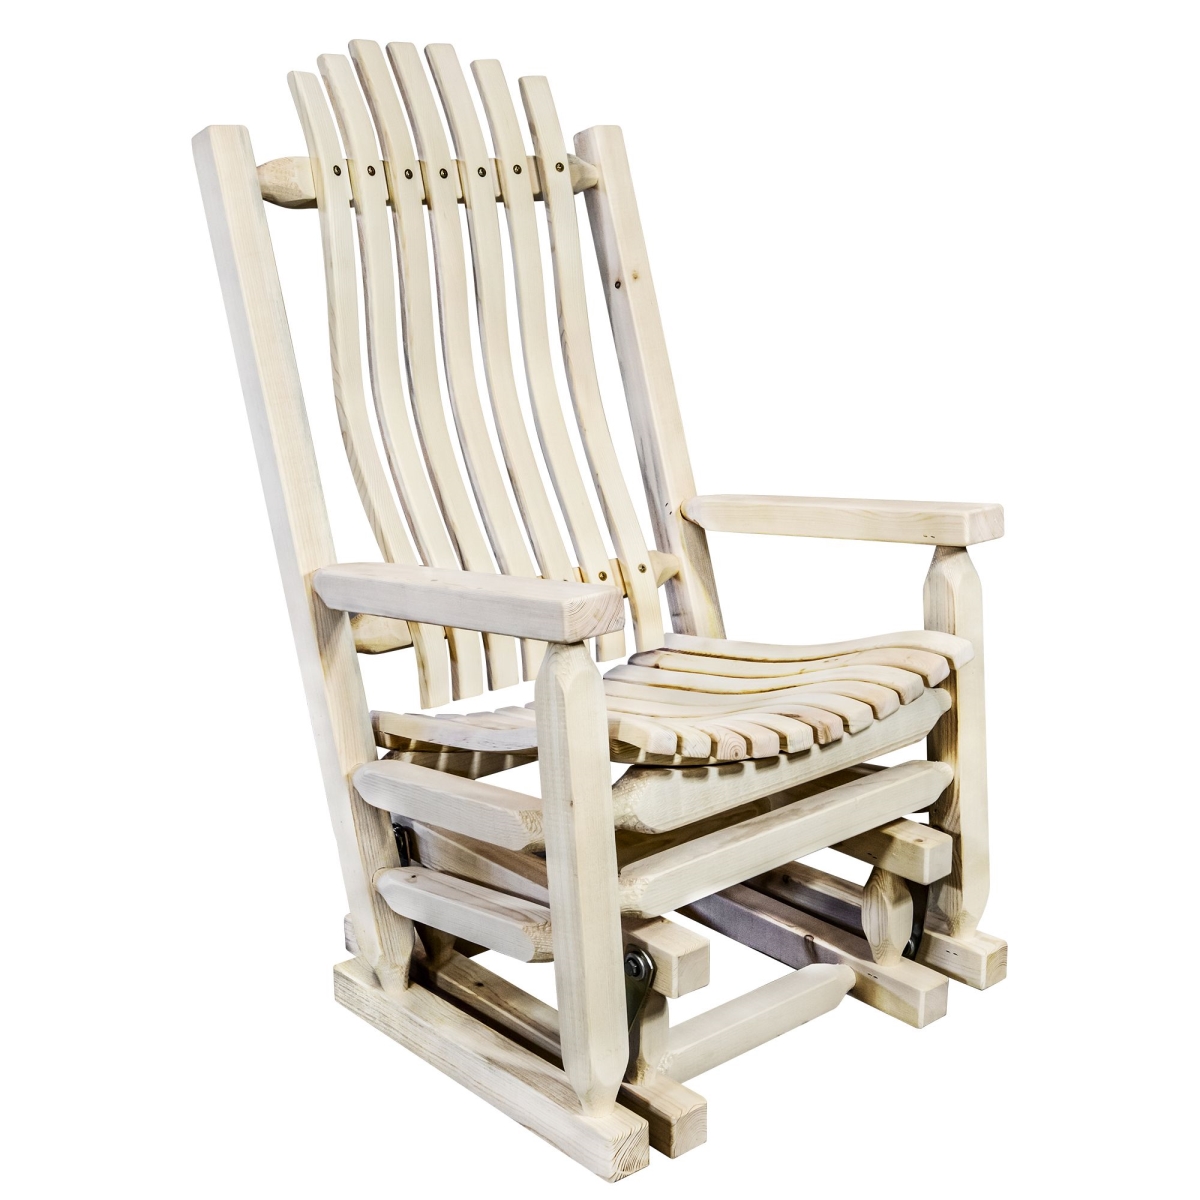 Montana Woodworks MWHCGR Homestead Collection Glider Rocker, Ready to Finish